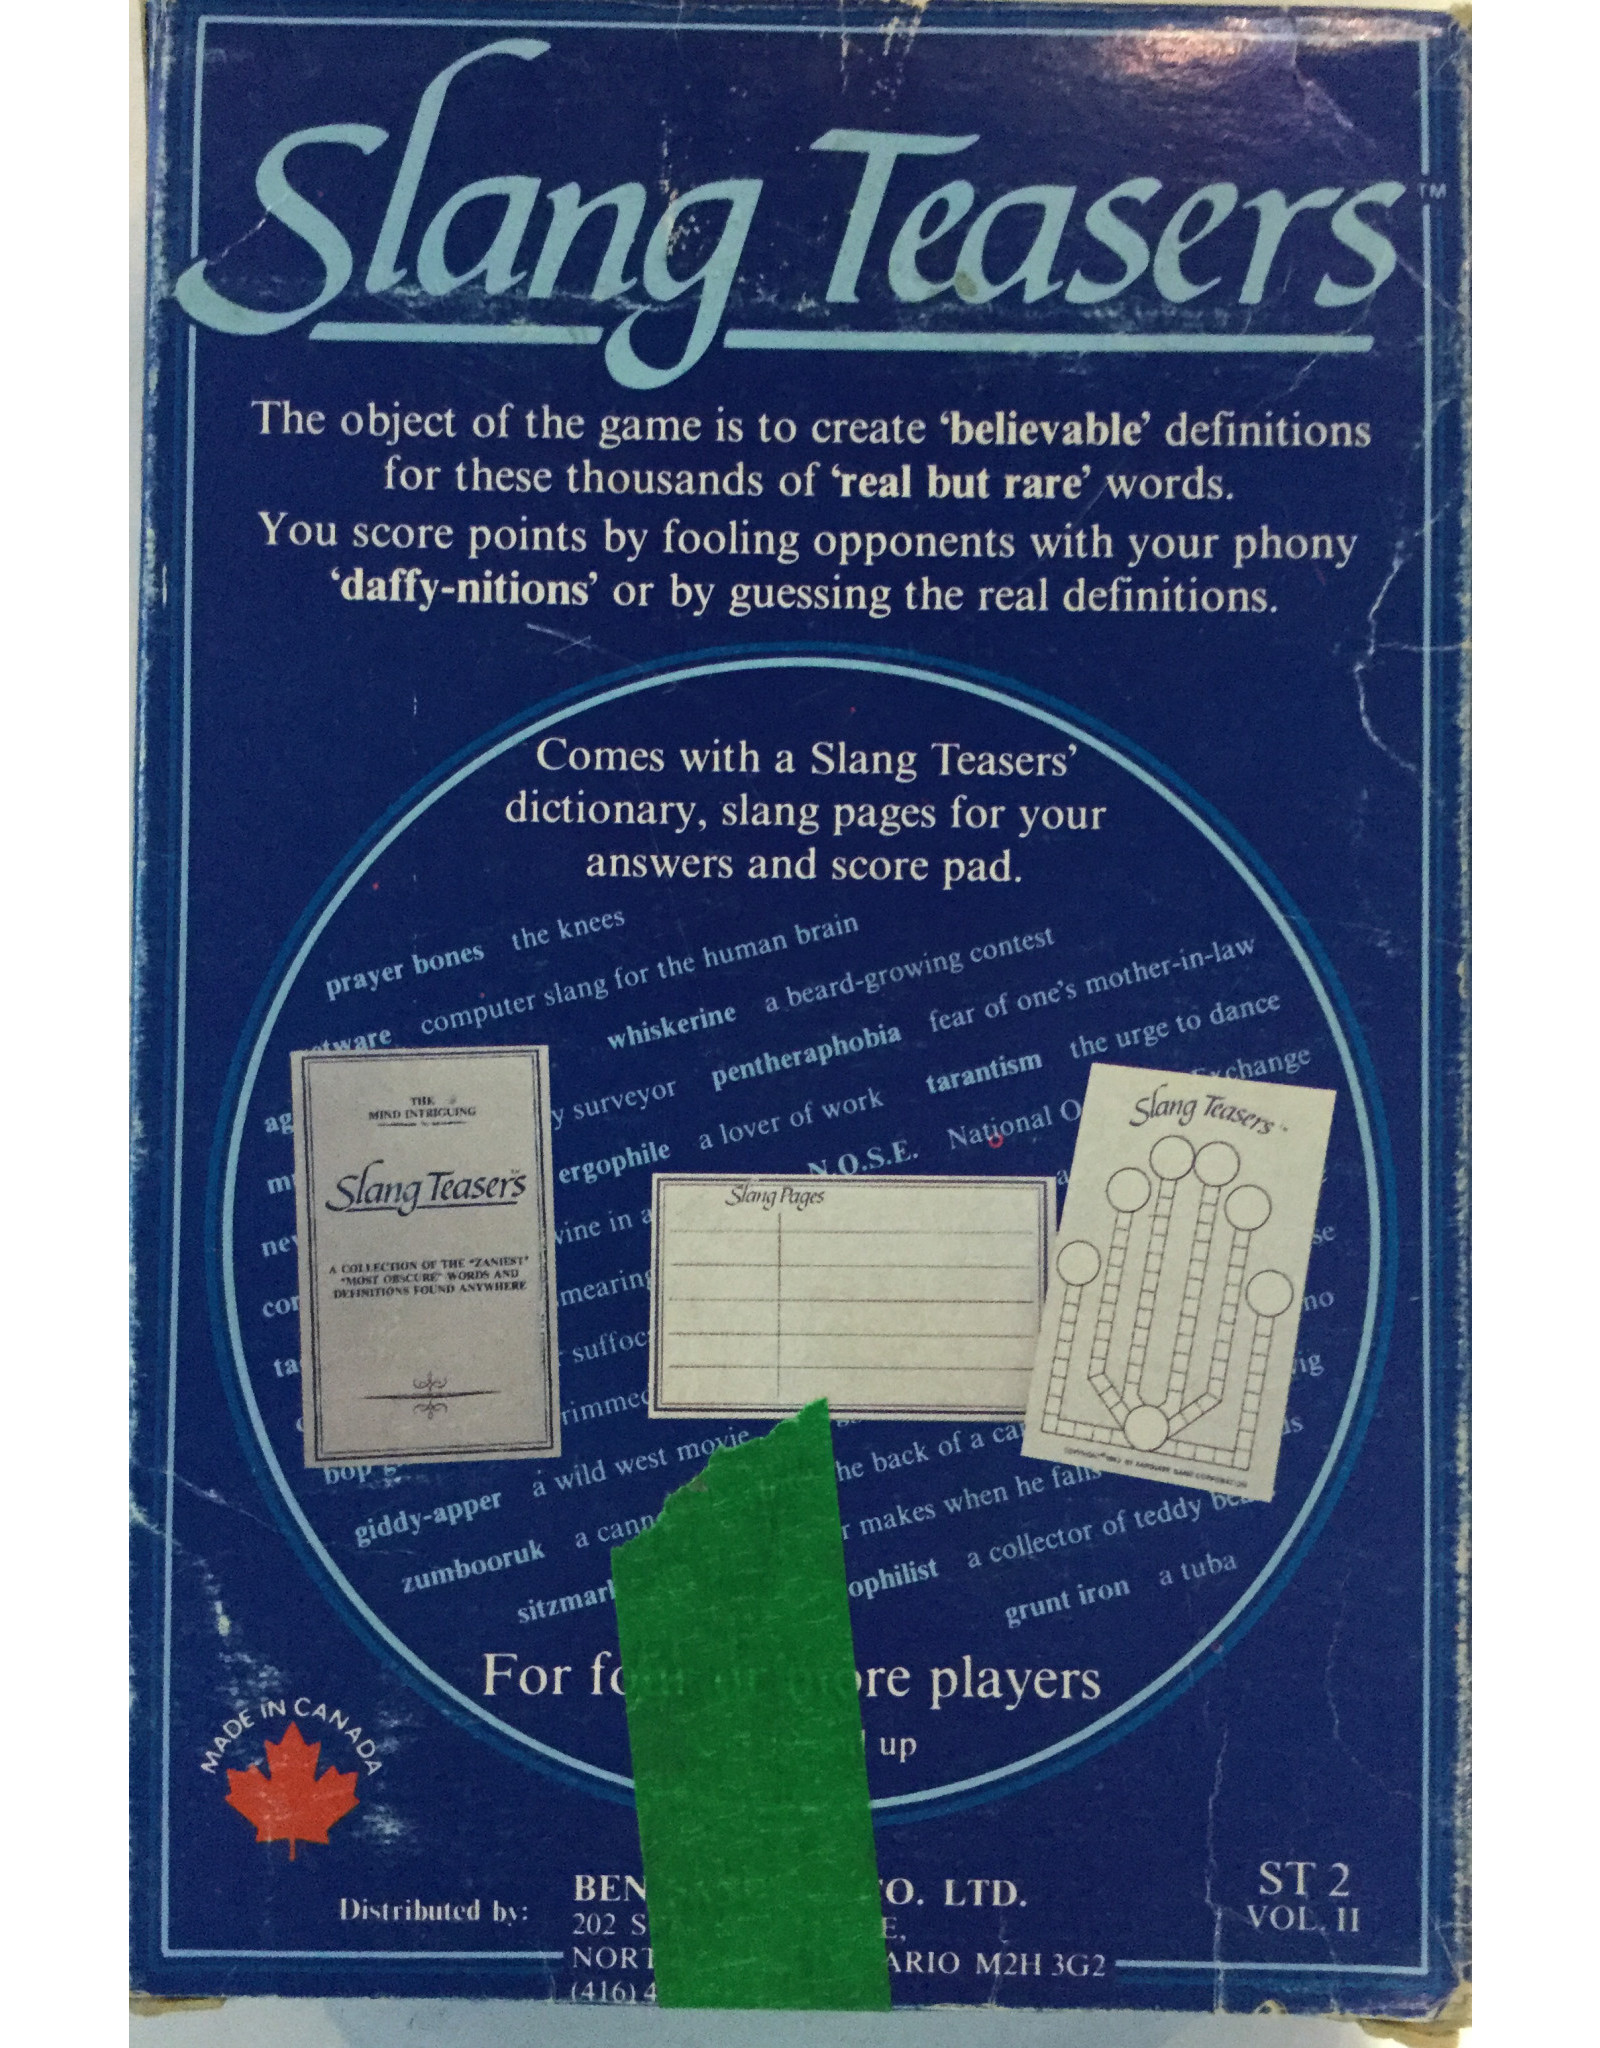 Canada Games Slang Teasers 2nd Edition (1984)